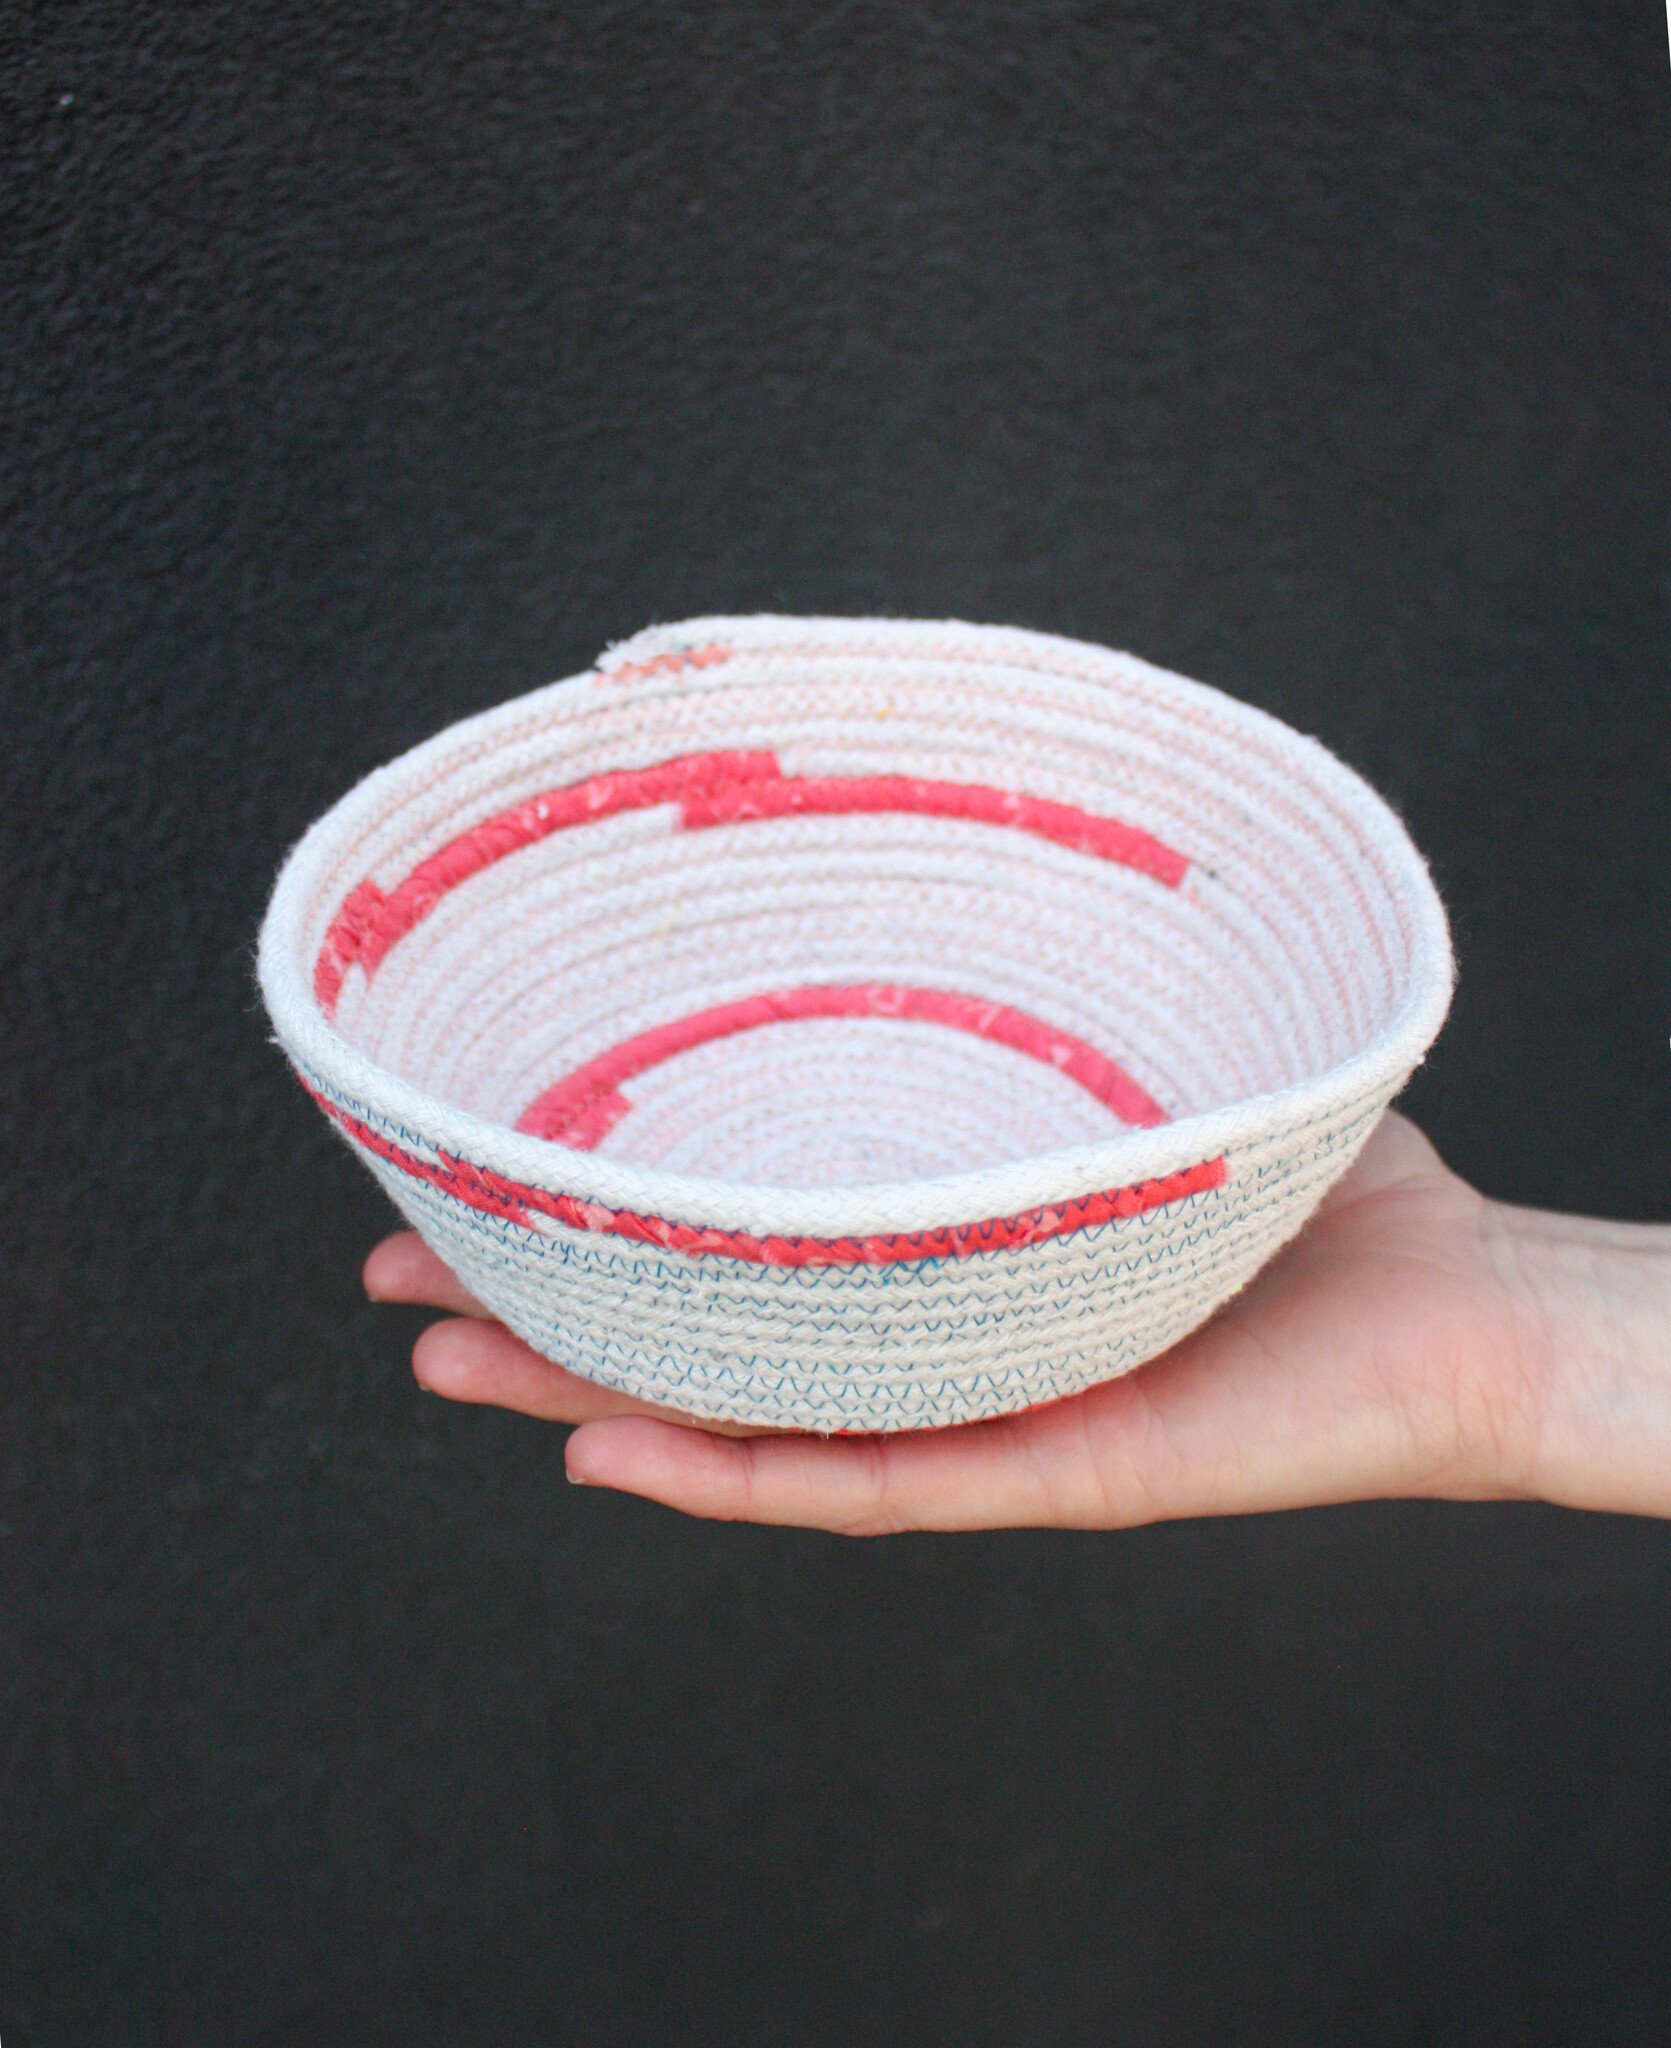 Colleen Connolly Learn to Sew: Rope Baskets, Monday, May 27th, 5:30pm-8:30pm